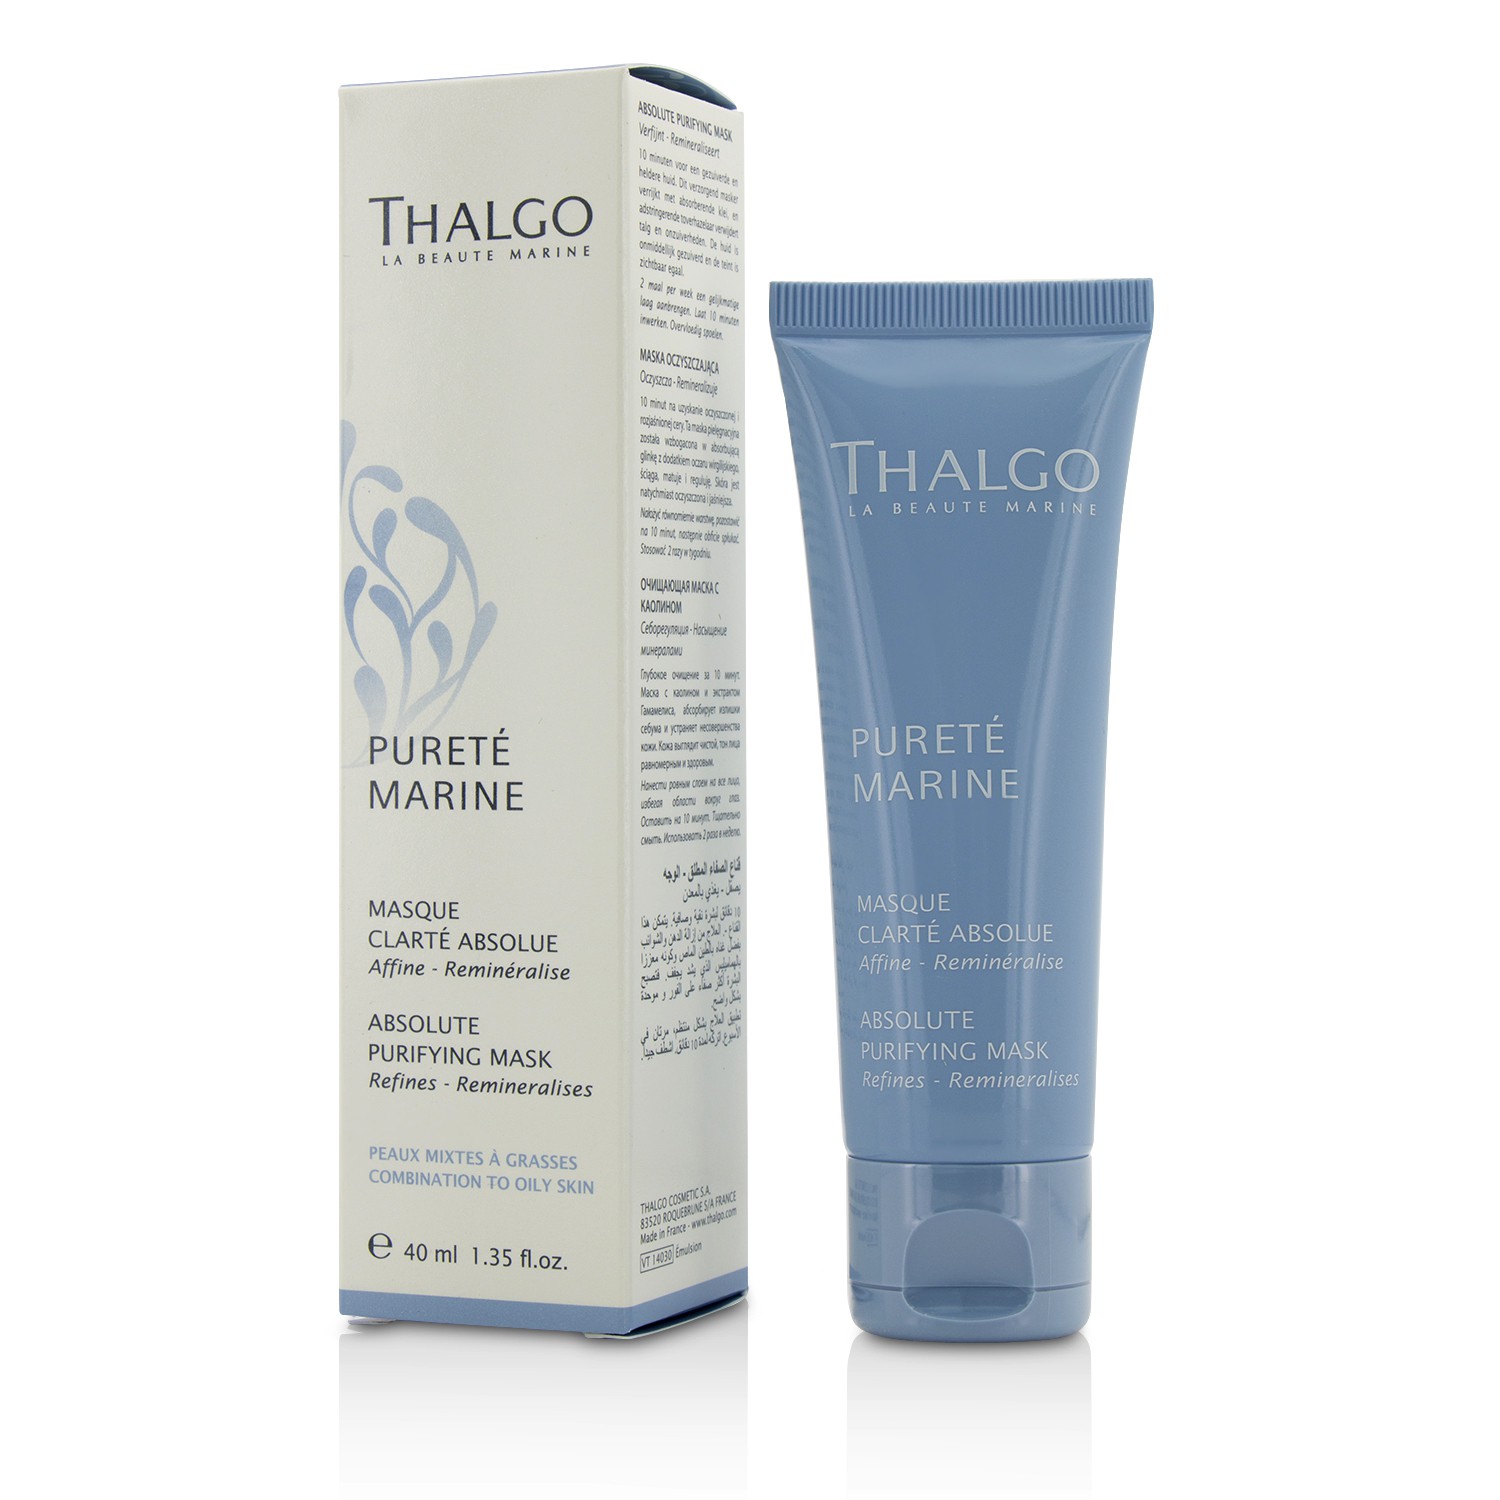 Purete Marine Absolute Purifying Mask - For Combination to Oily Skin Thalgo Image